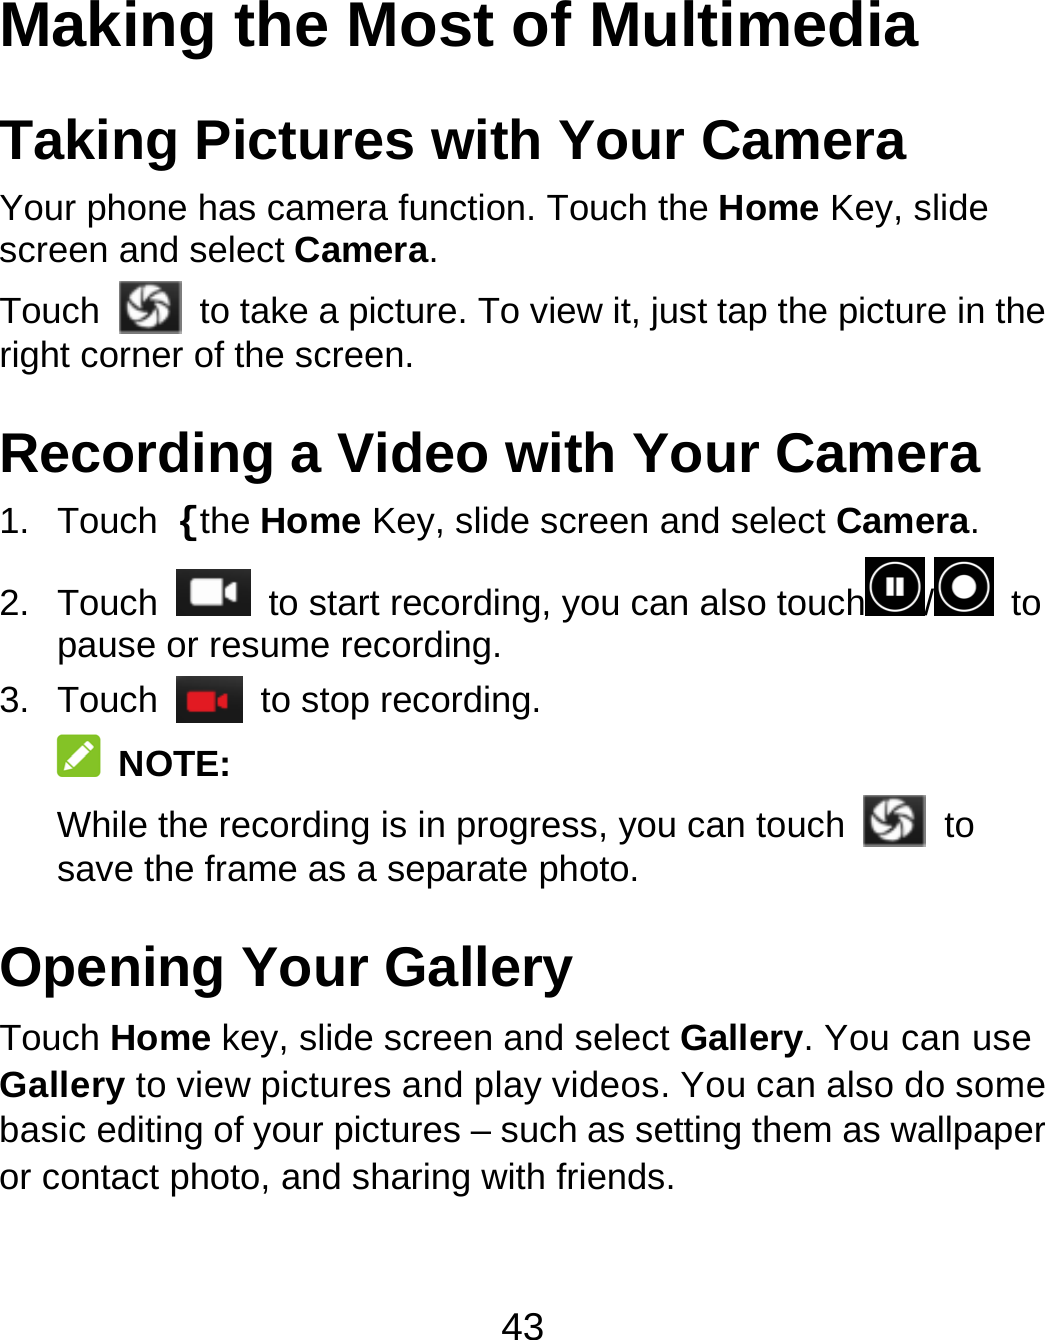 43 Making the Most of Multimedia Taking Pictures with Your Camera Your phone has camera function. Touch the Home Key, slide screen and select Camera.        Touch   to take a picture. To view it, just tap the picture in the right corner of the screen. Recording a Video with Your Camera 1. Touch {the Home Key, slide screen and select Camera. 2. Touch    to start recording, you can also touch / to pause or resume recording. 3. Touch   to stop recording.  NOTE:     While the recording is in progress, you can touch   to save the frame as a separate photo. Opening Your Gallery Touch Home key, slide screen and select Gallery. You can use Gallery to view pictures and play videos. You can also do some basic editing of your pictures – such as setting them as wallpaper or contact photo, and sharing with friends. 